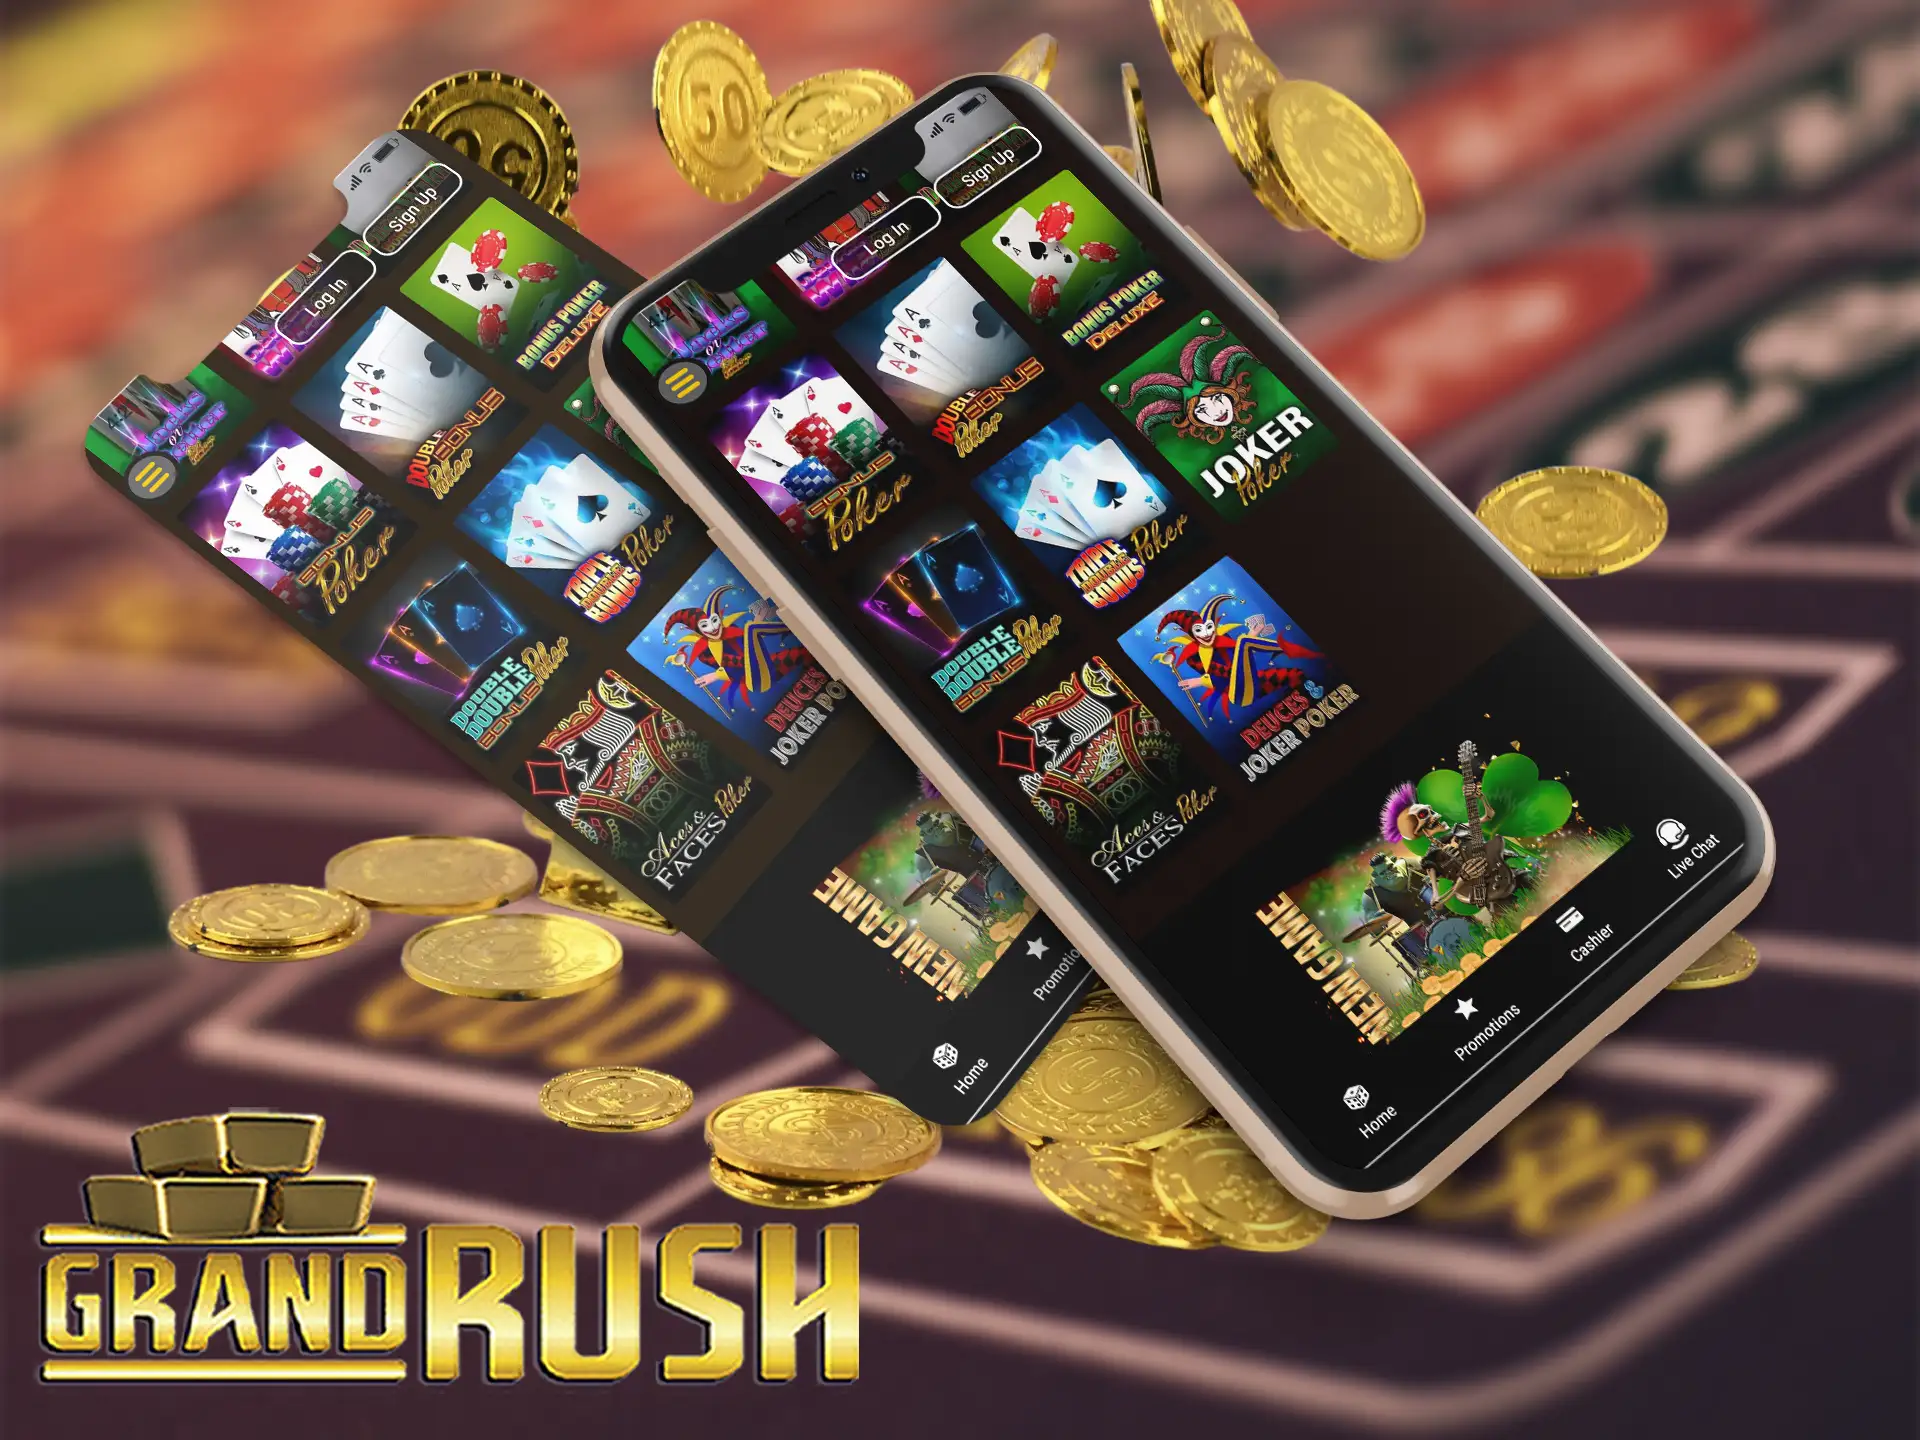 Play poker at Grand Rush through mobile app for any Android and iOS device.